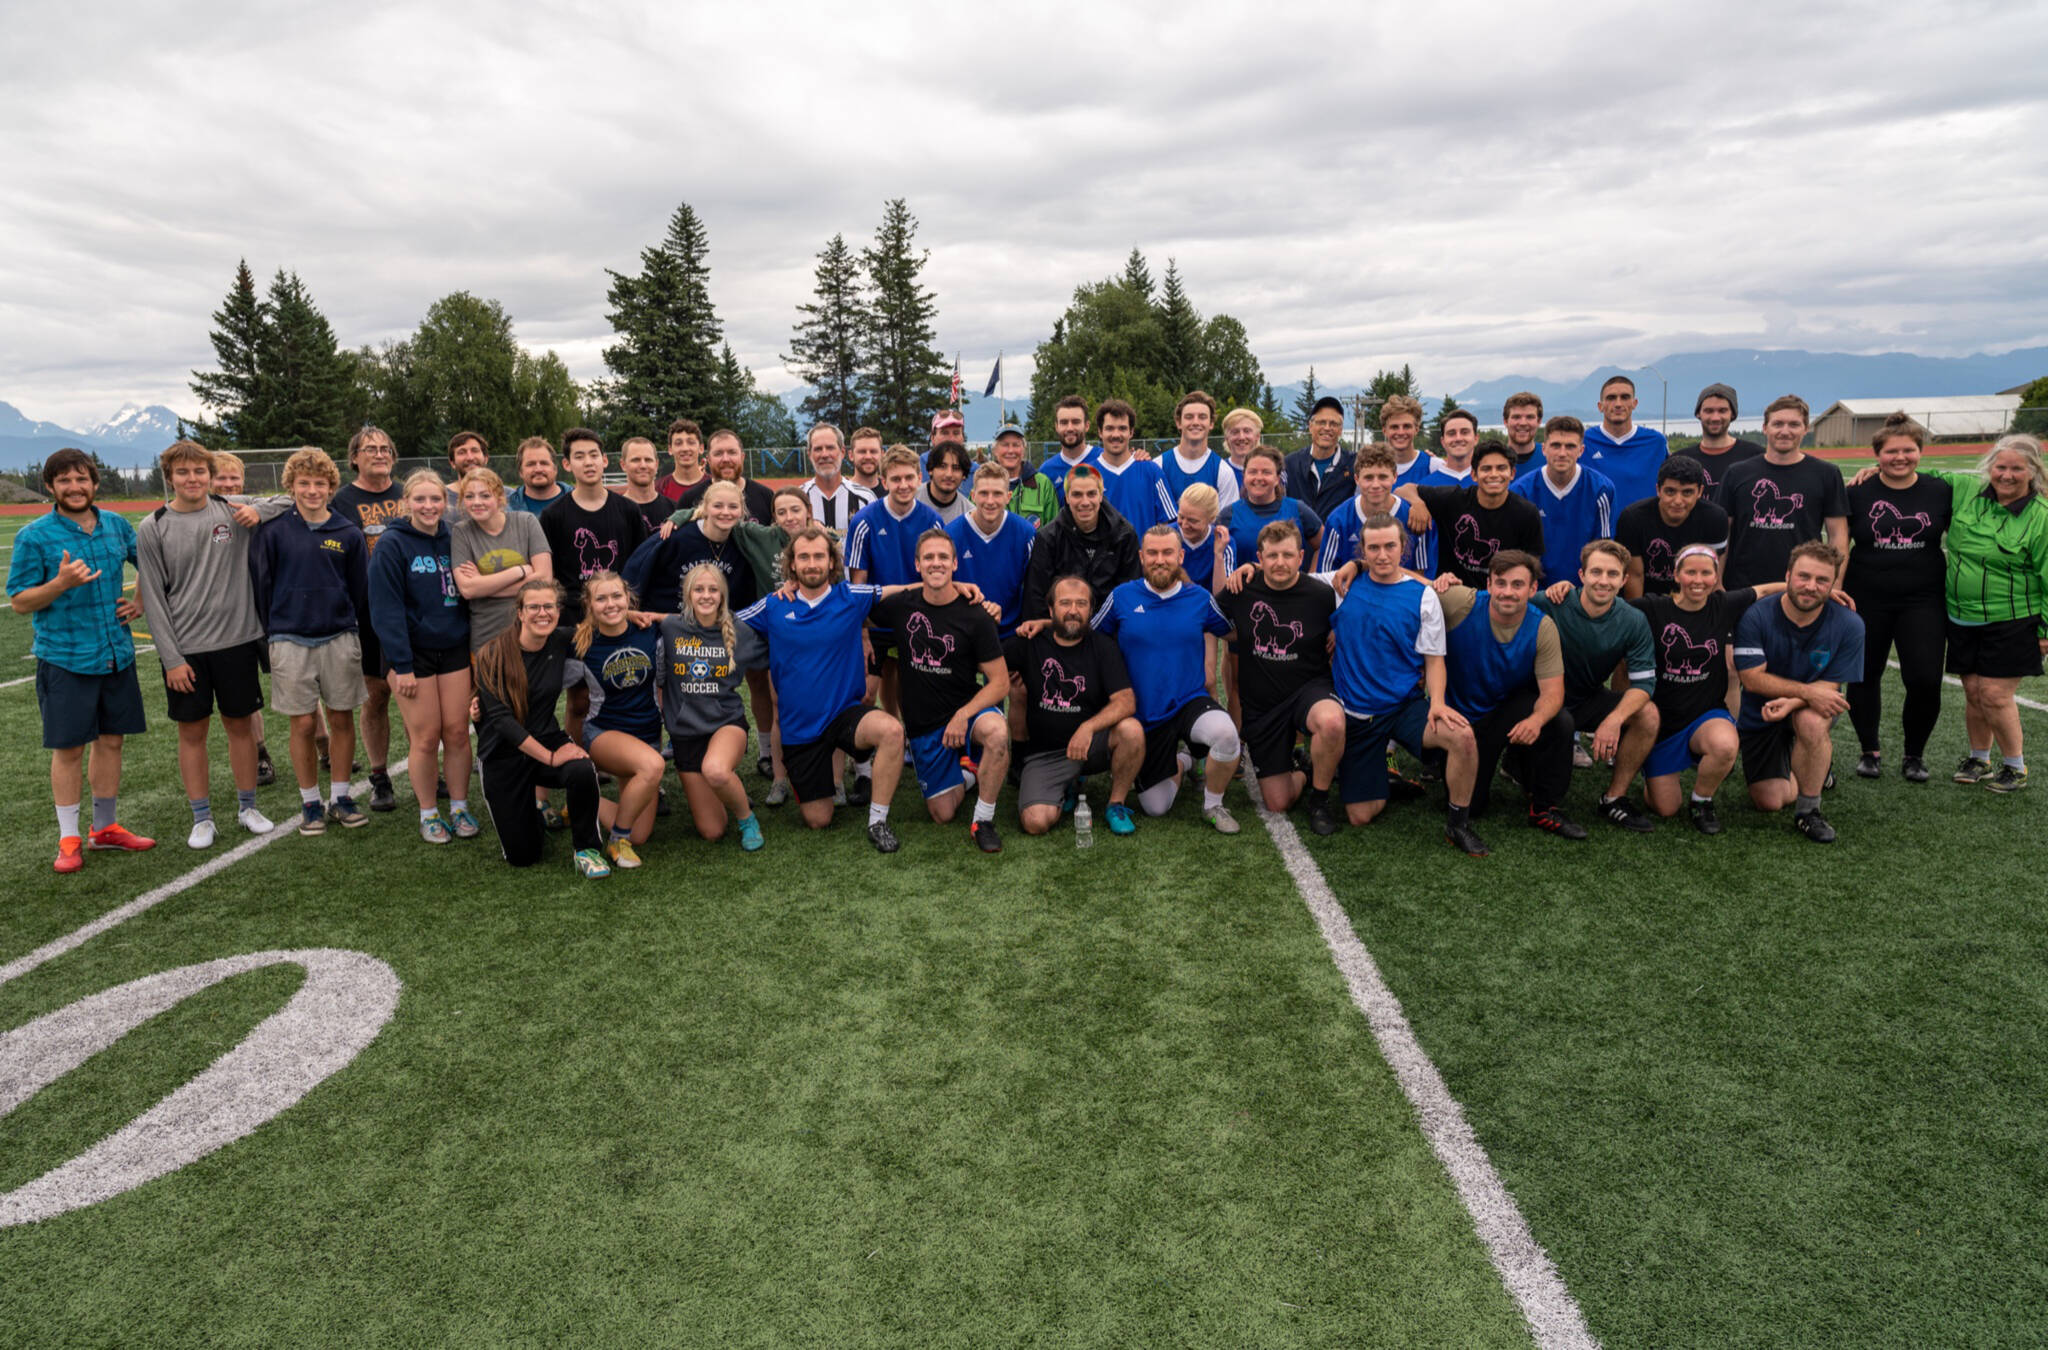 Community soccer players after a special match celebrating the life of Drew Brown at Homer High School Field on Sunday, Aug. 14, 2022. (Photo by Uliana Reutov)